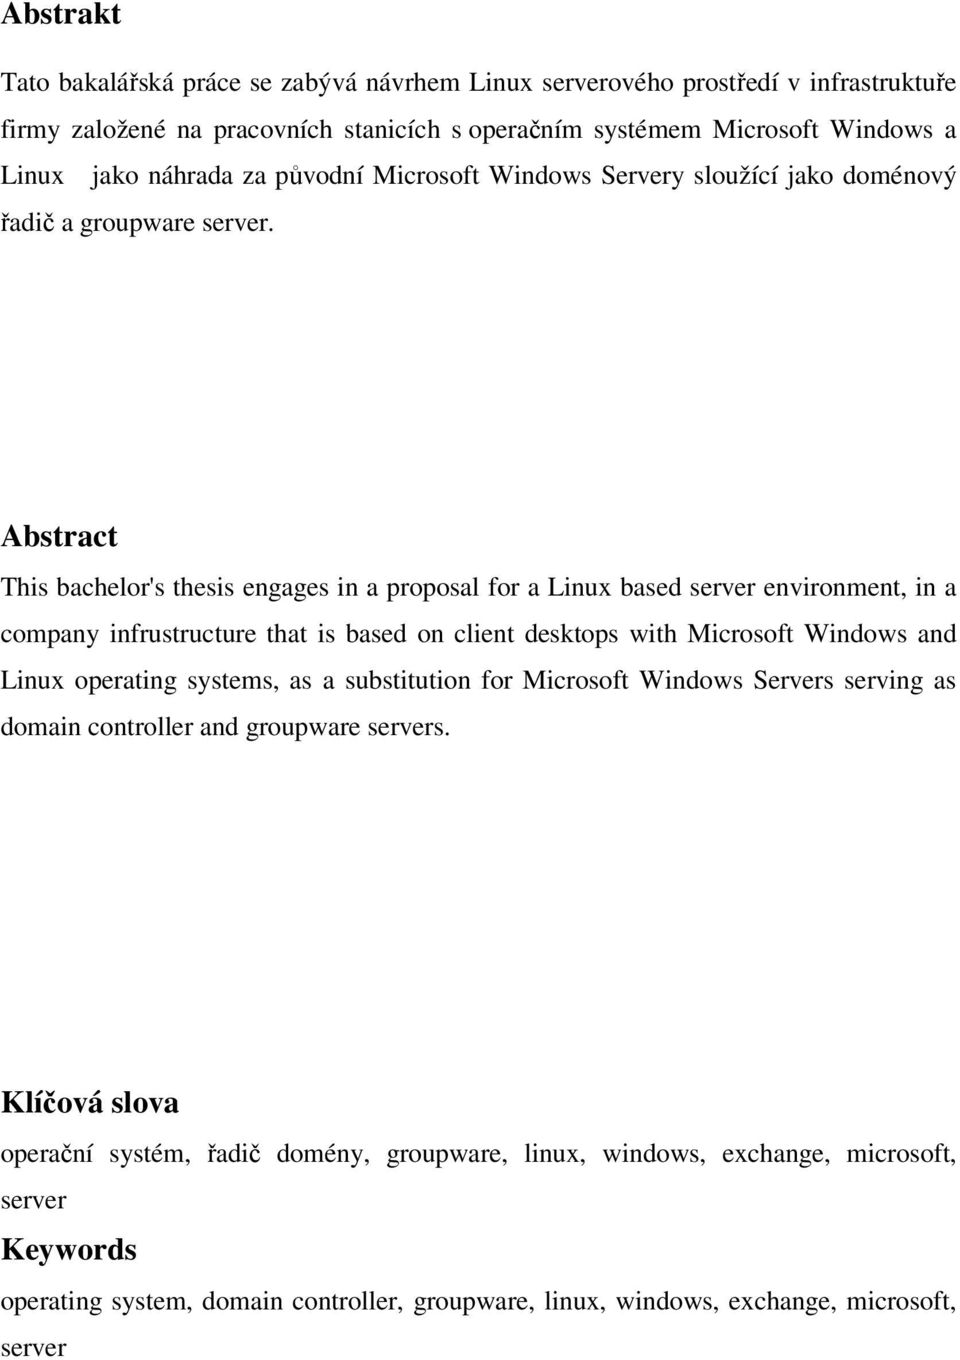 Abstract This bachelor's thesis engages in a proposal for a Linux based server environment, in a company infrustructure that is based on client desktops with Microsoft Windows and Linux operating